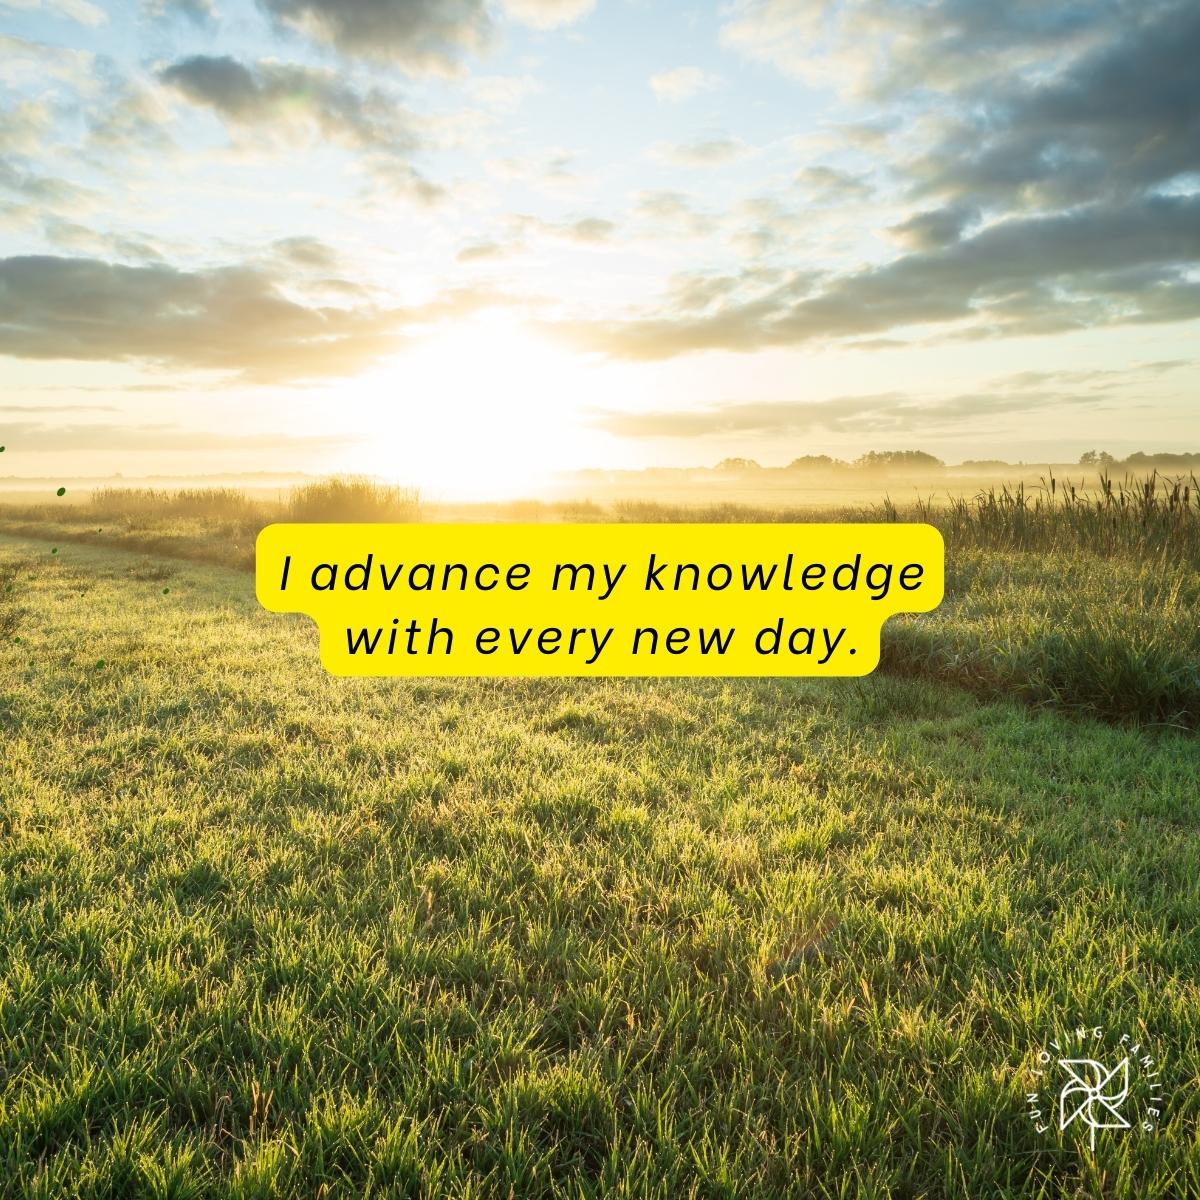 I advance my knowledge with every new day affirmation